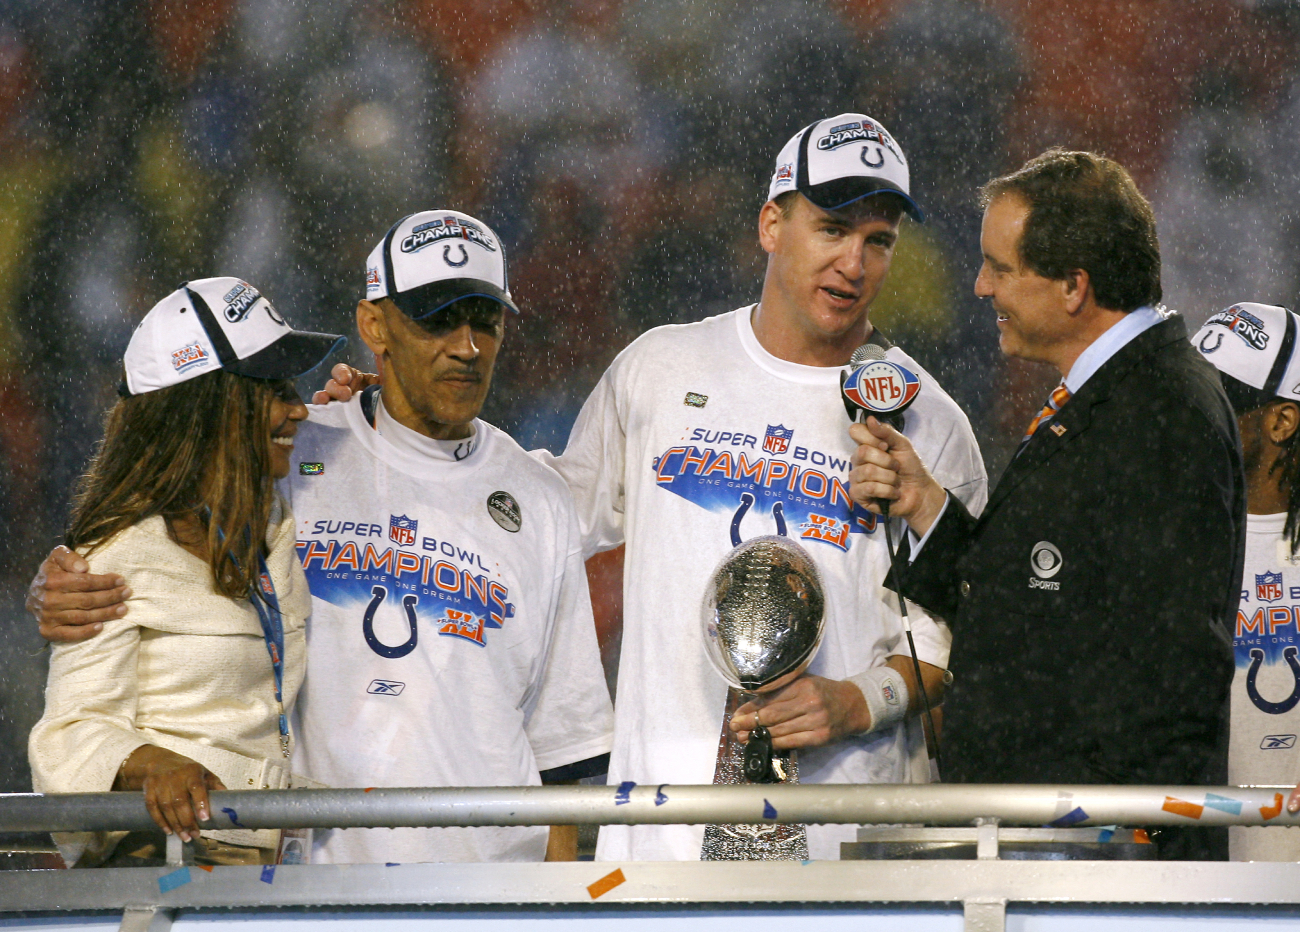 The Indianapolis Colts have had a lot of success over the years. So, how many Super Bowls have the Indianapolis Colts won?